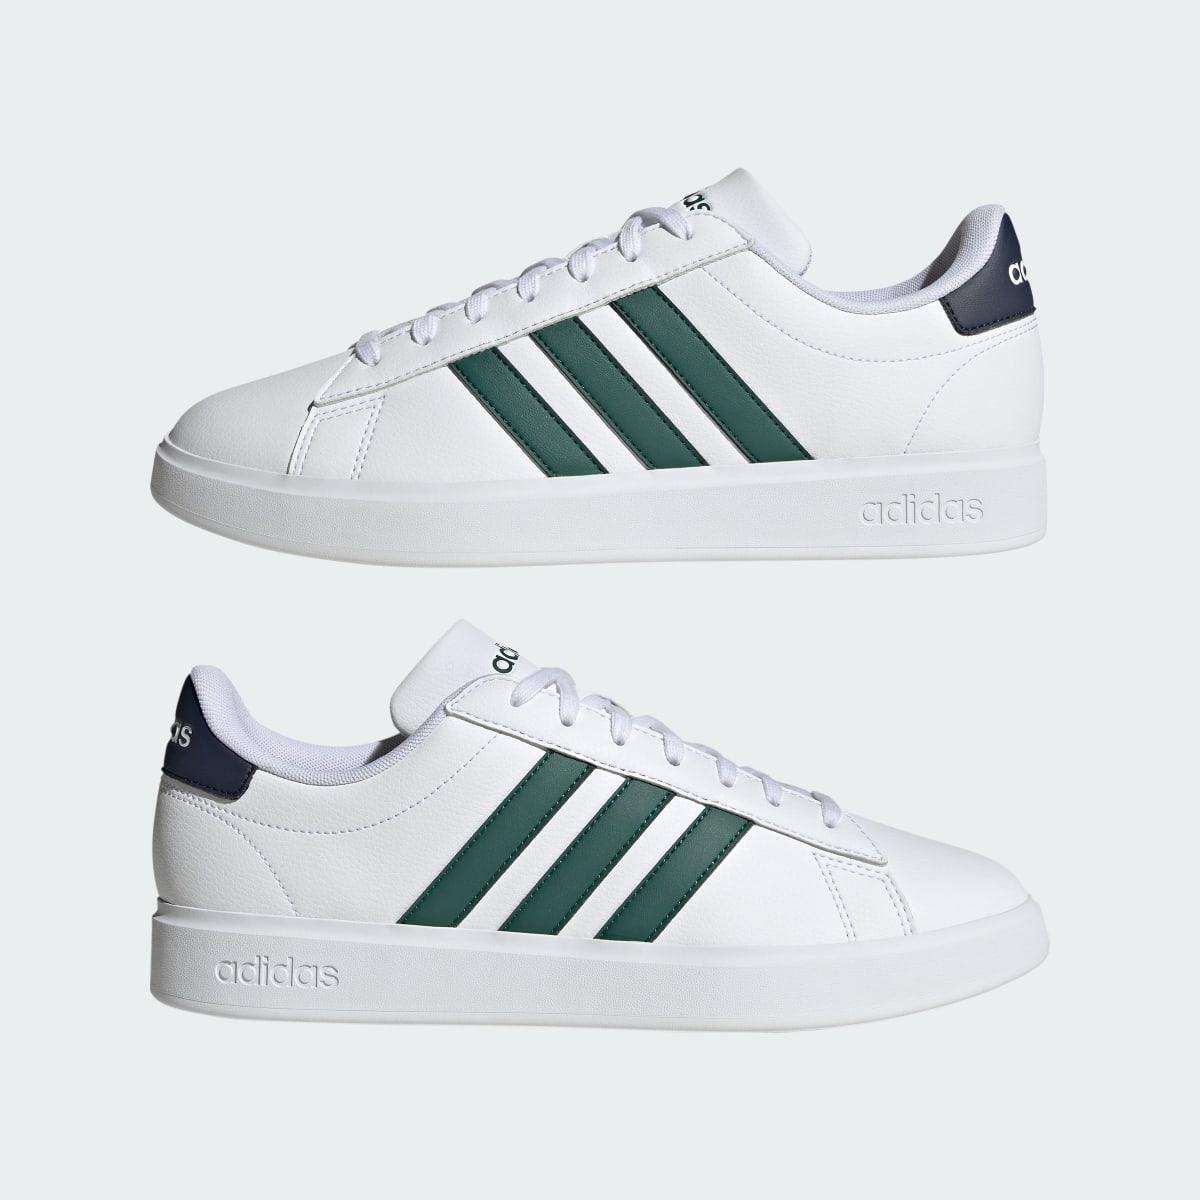 Adidas Grand Court Shoes. 8